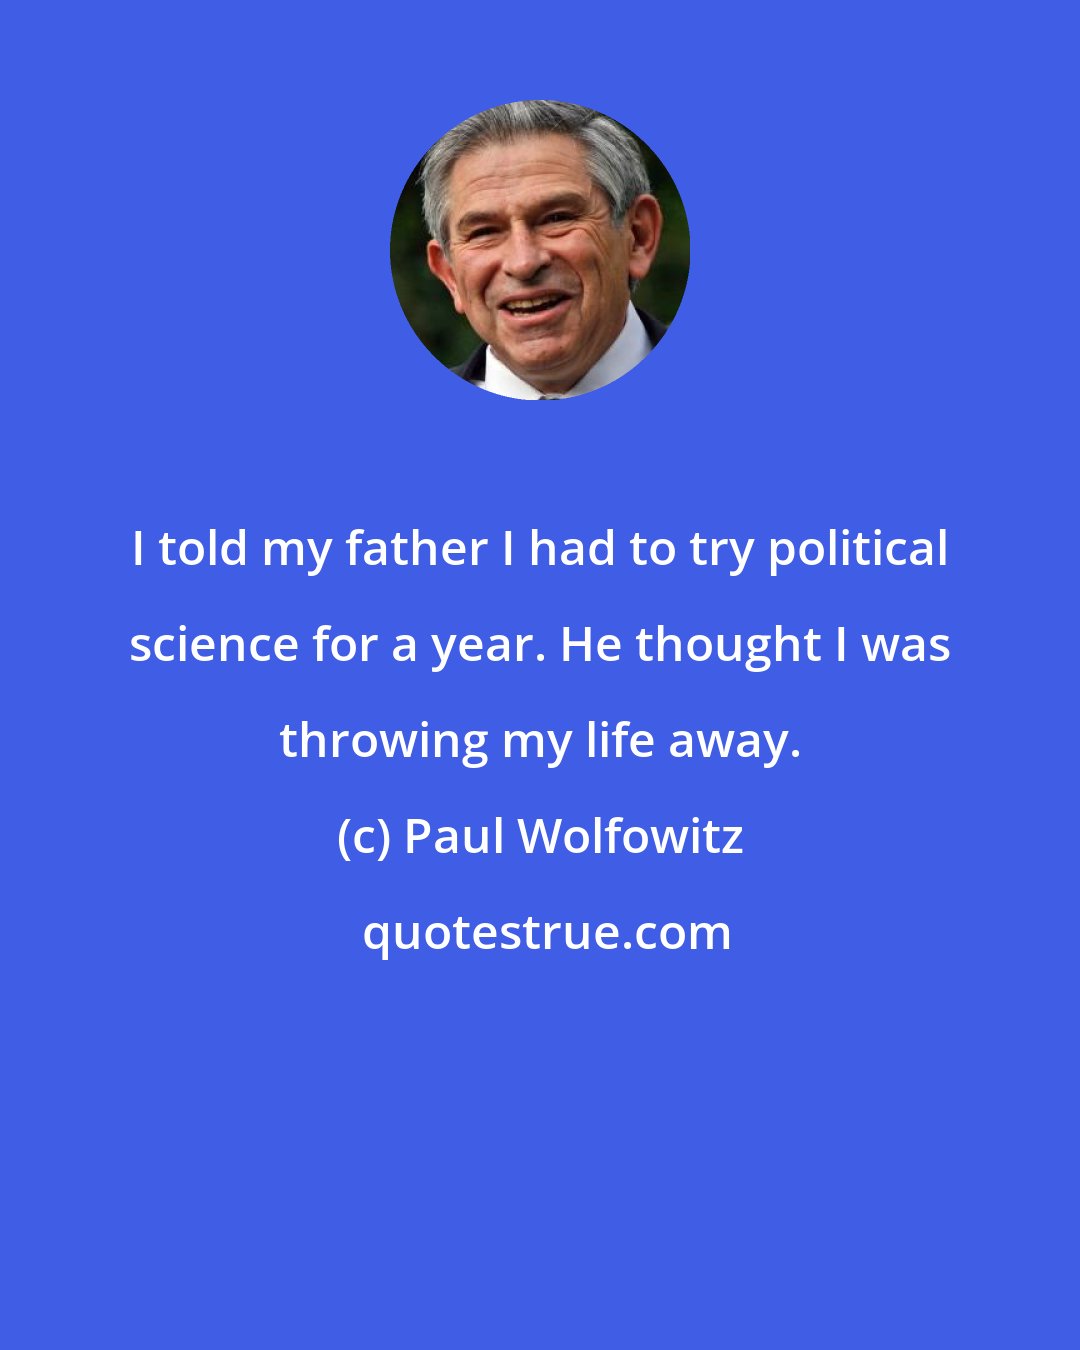 Paul Wolfowitz: I told my father I had to try political science for a year. He thought I was throwing my life away.